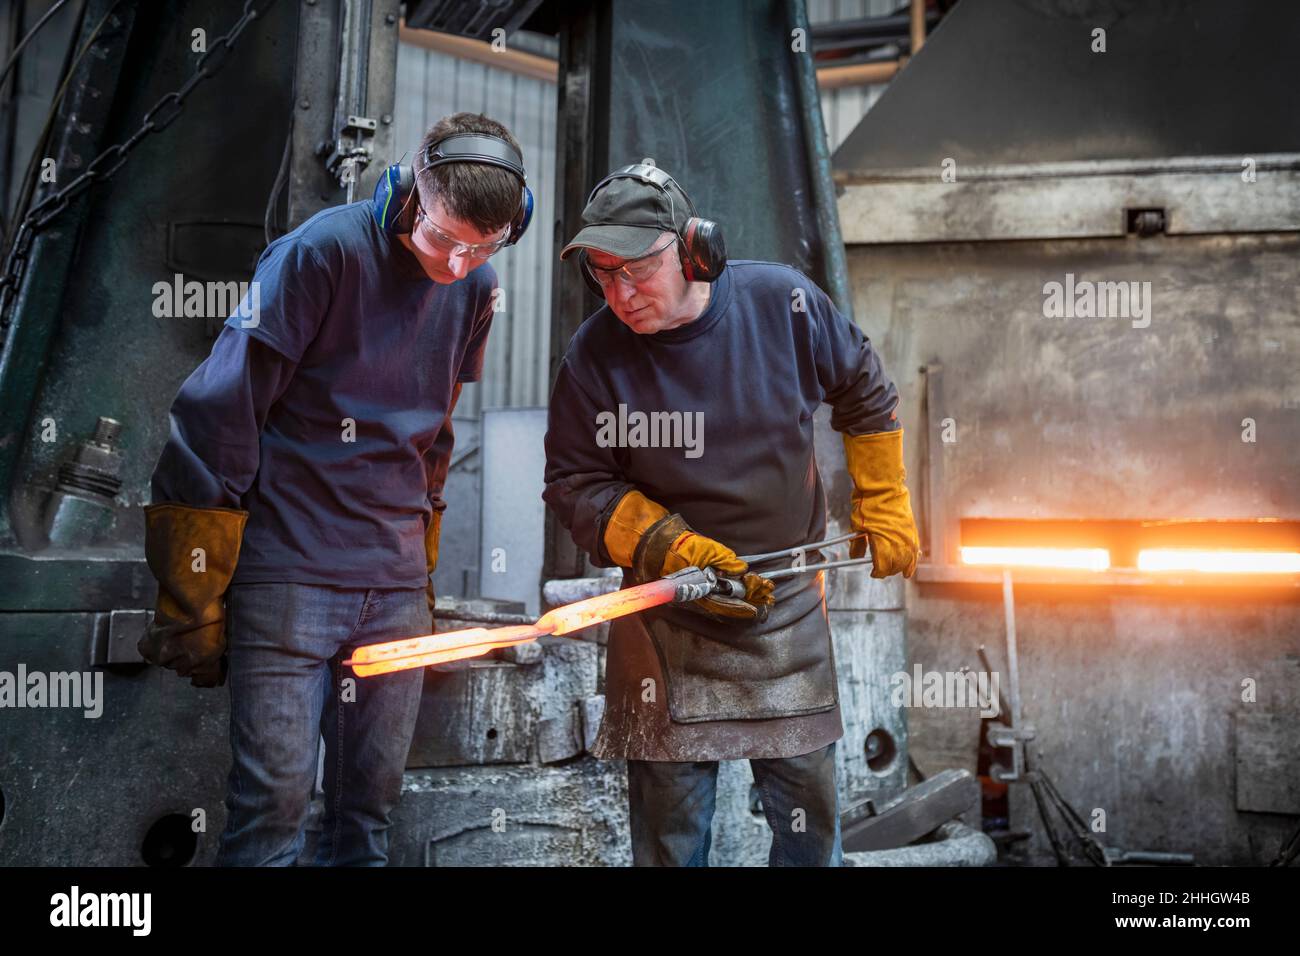 Engineer with apprentice inspecting a forged steel part in industrial forge Stock Photo